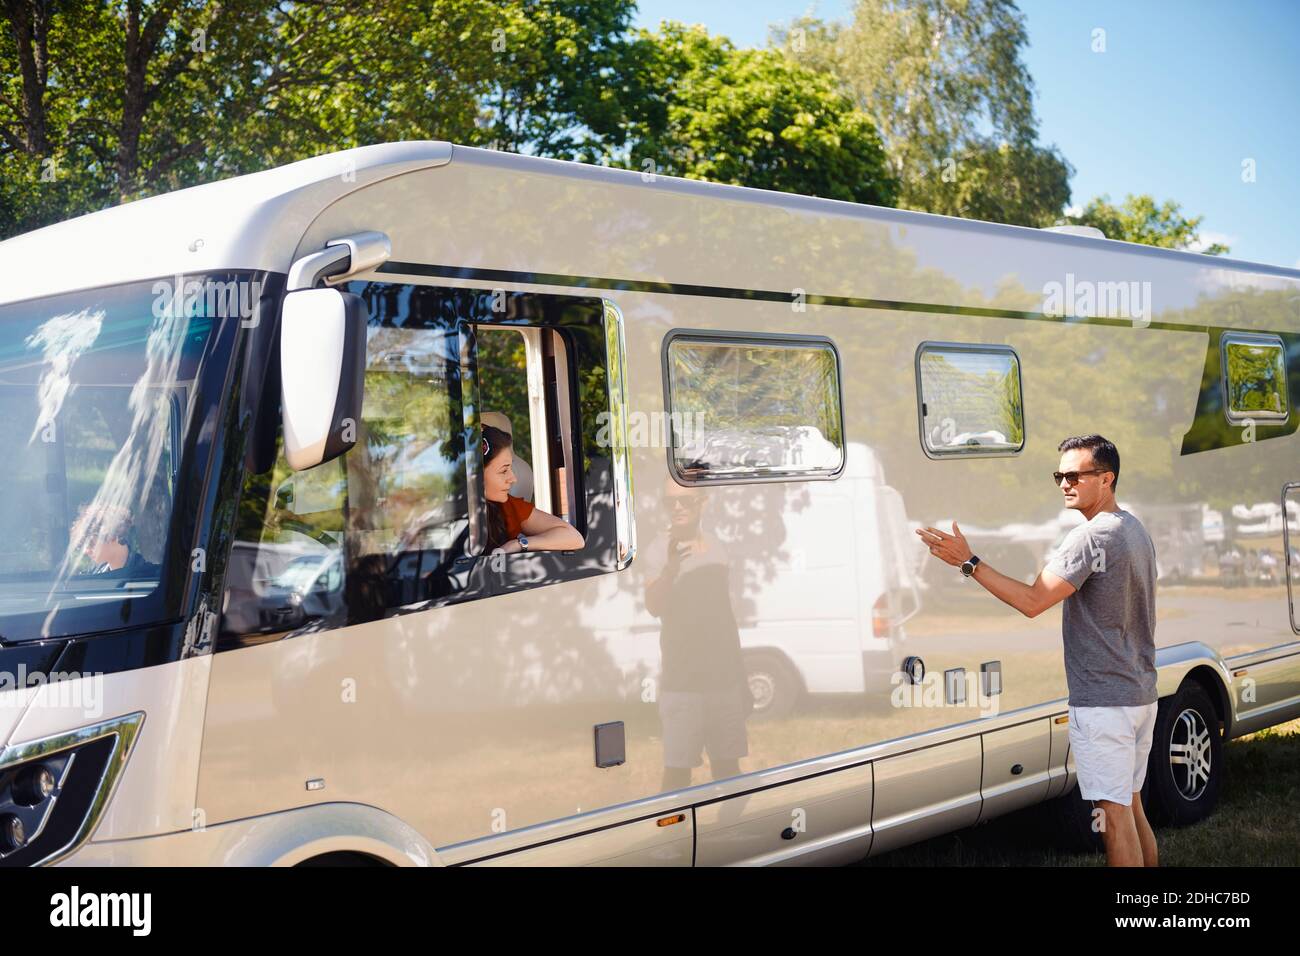 Man talking to woman sitting in motor home during summer vacation Stock Photo